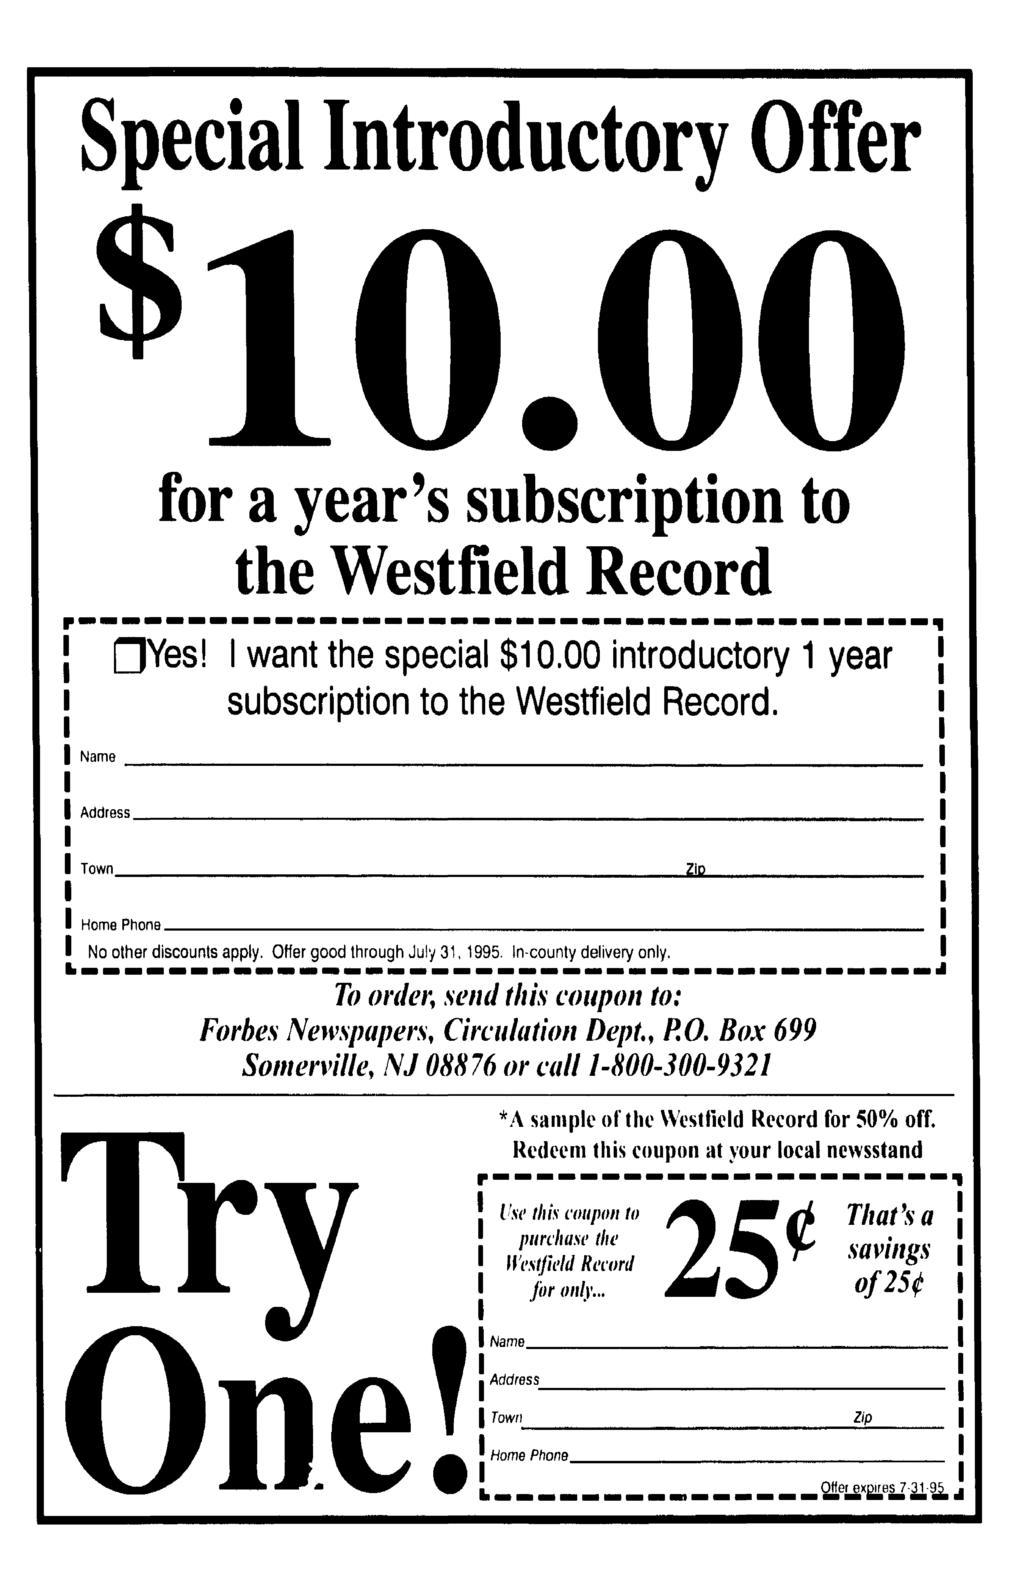 Special ntroductory Offer for a year's subscription to the Westfield Record Yes! want the special $10.00 introductory 1 year subscription to the Westfield Record.